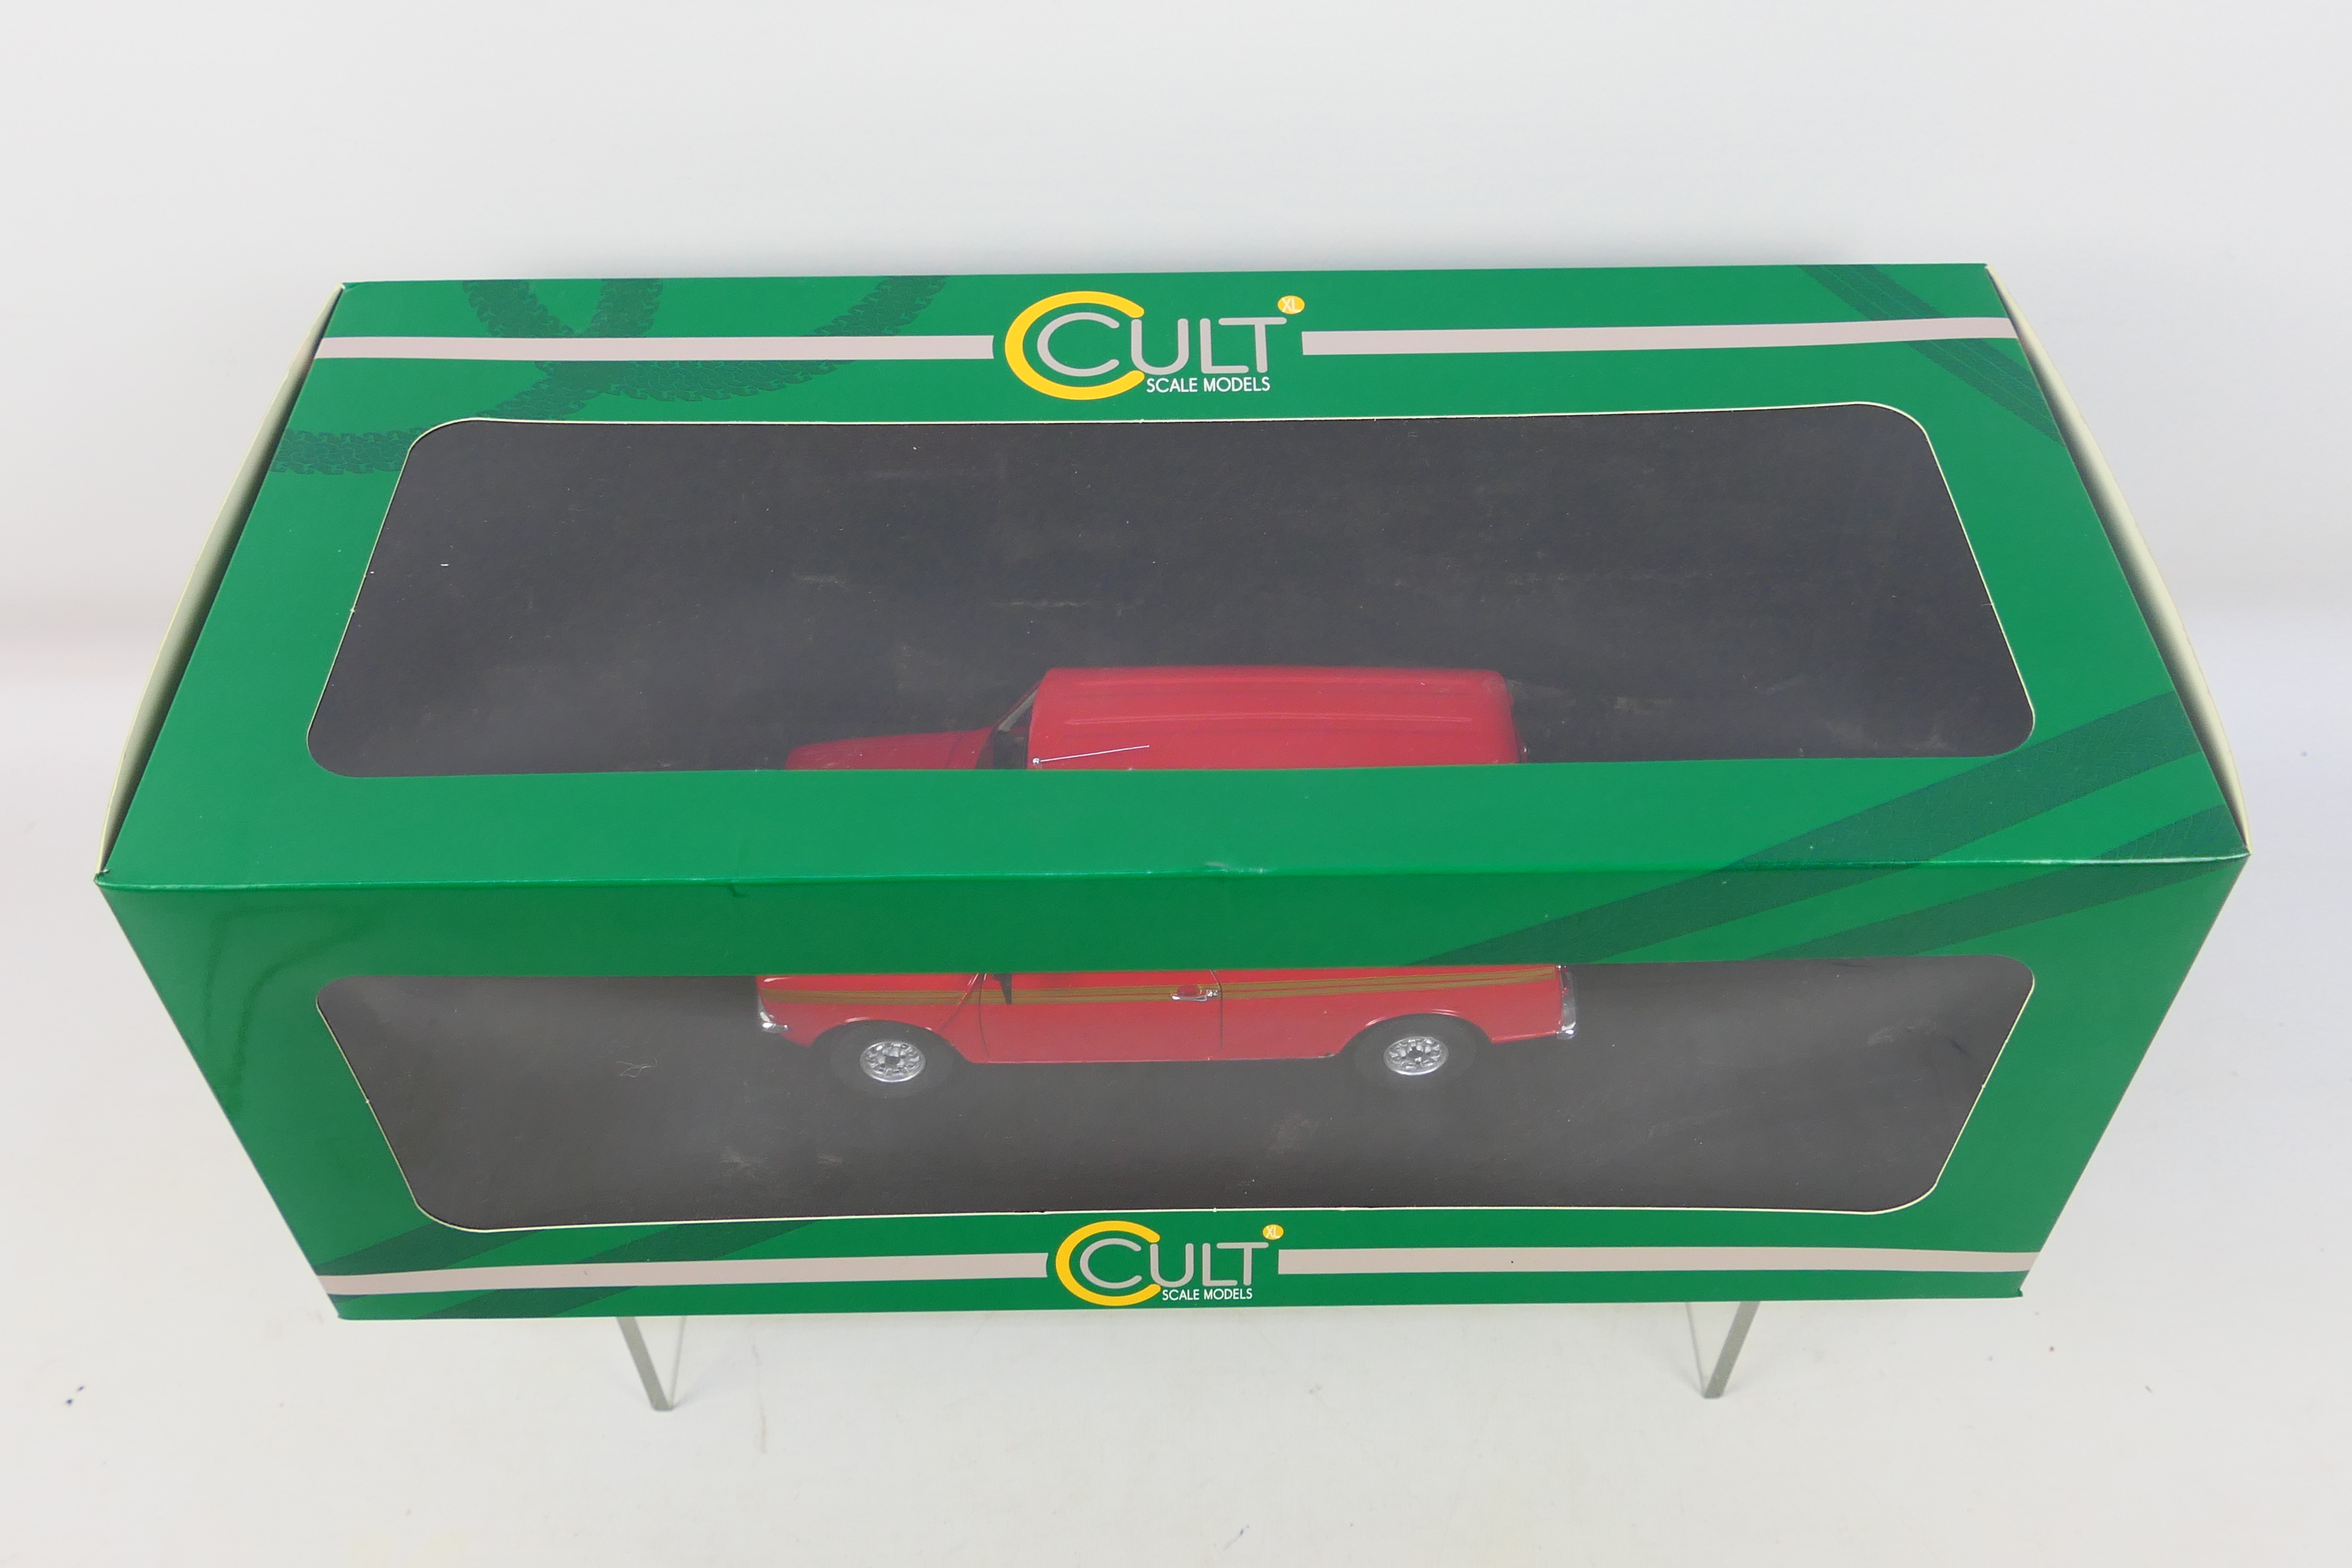 Cult Scale Models - A boxed 1:18 scale Cult Scale Models #CML018-1 Mini Clubman Estate HL. - Image 3 of 3